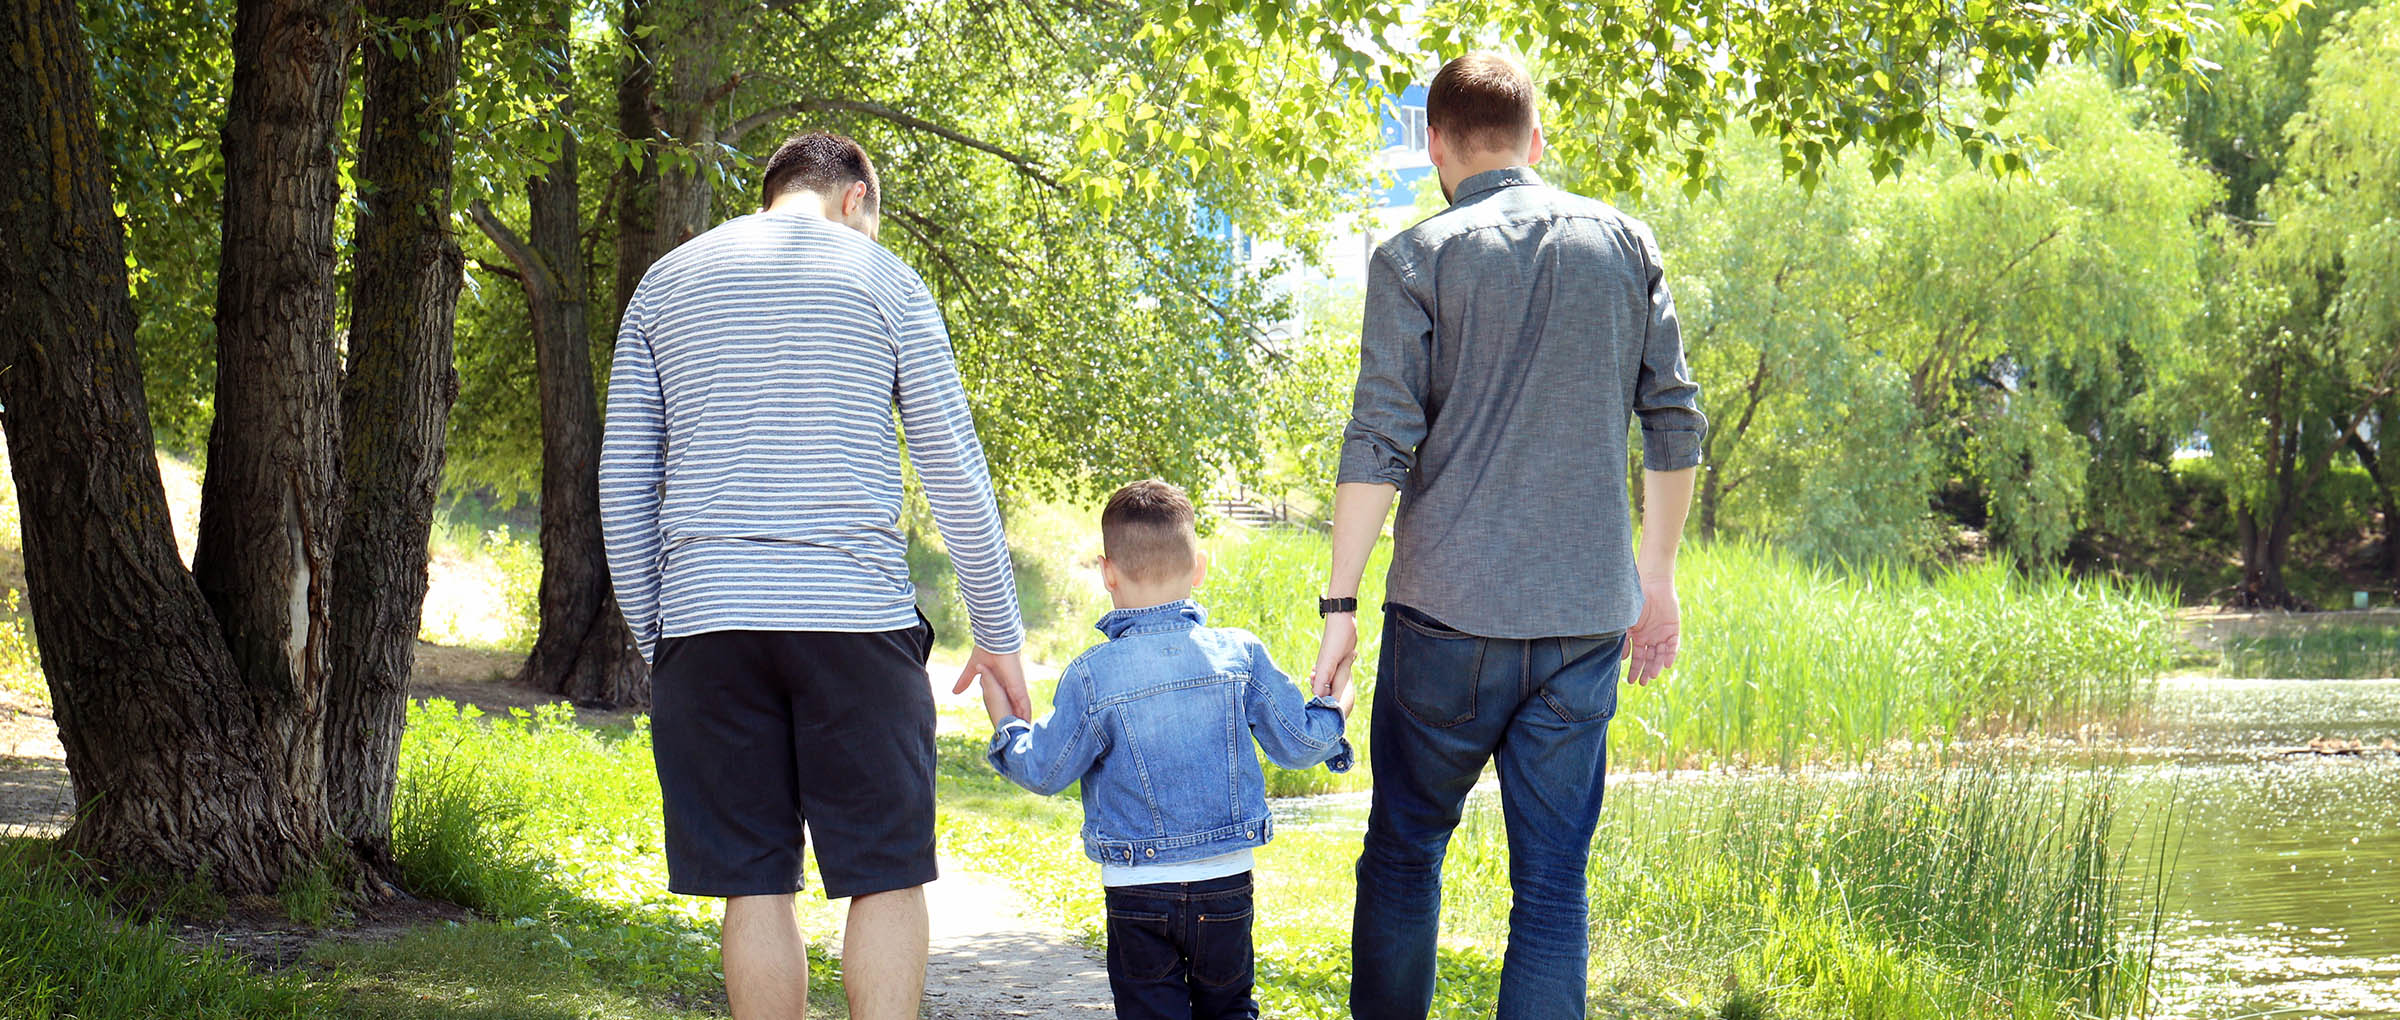 Surrogacy for gay couples